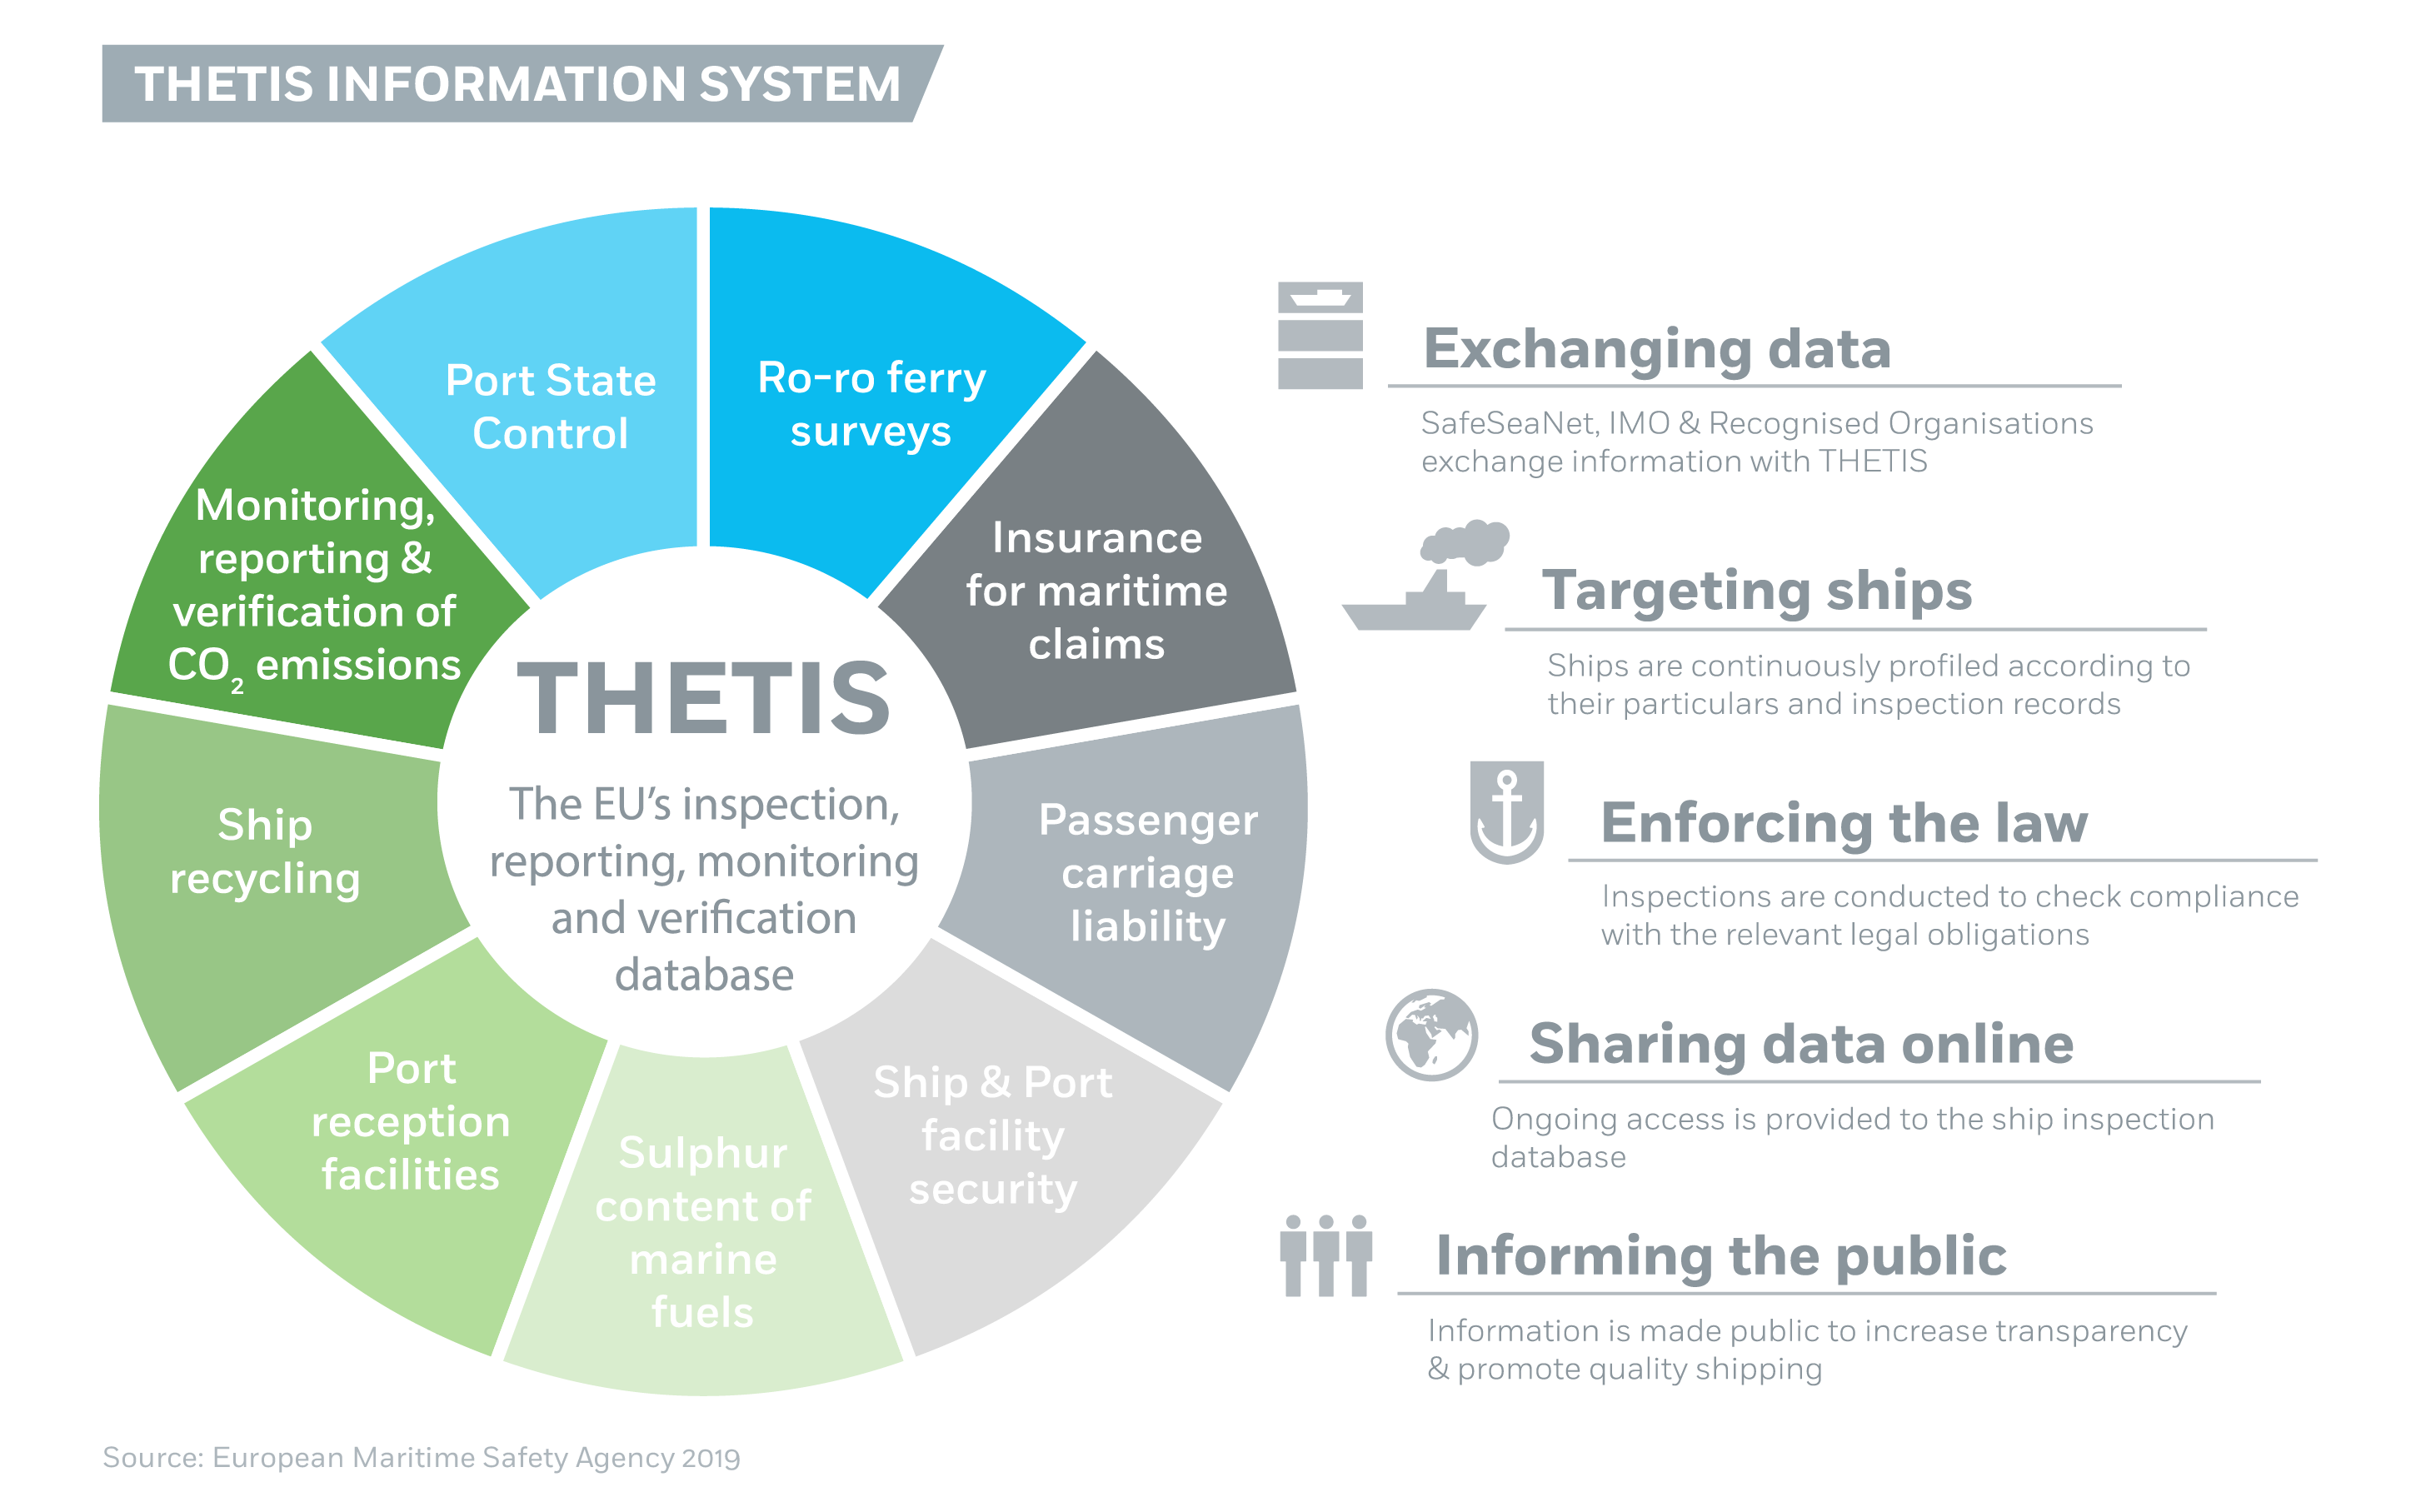 THETIS Information System Image 1